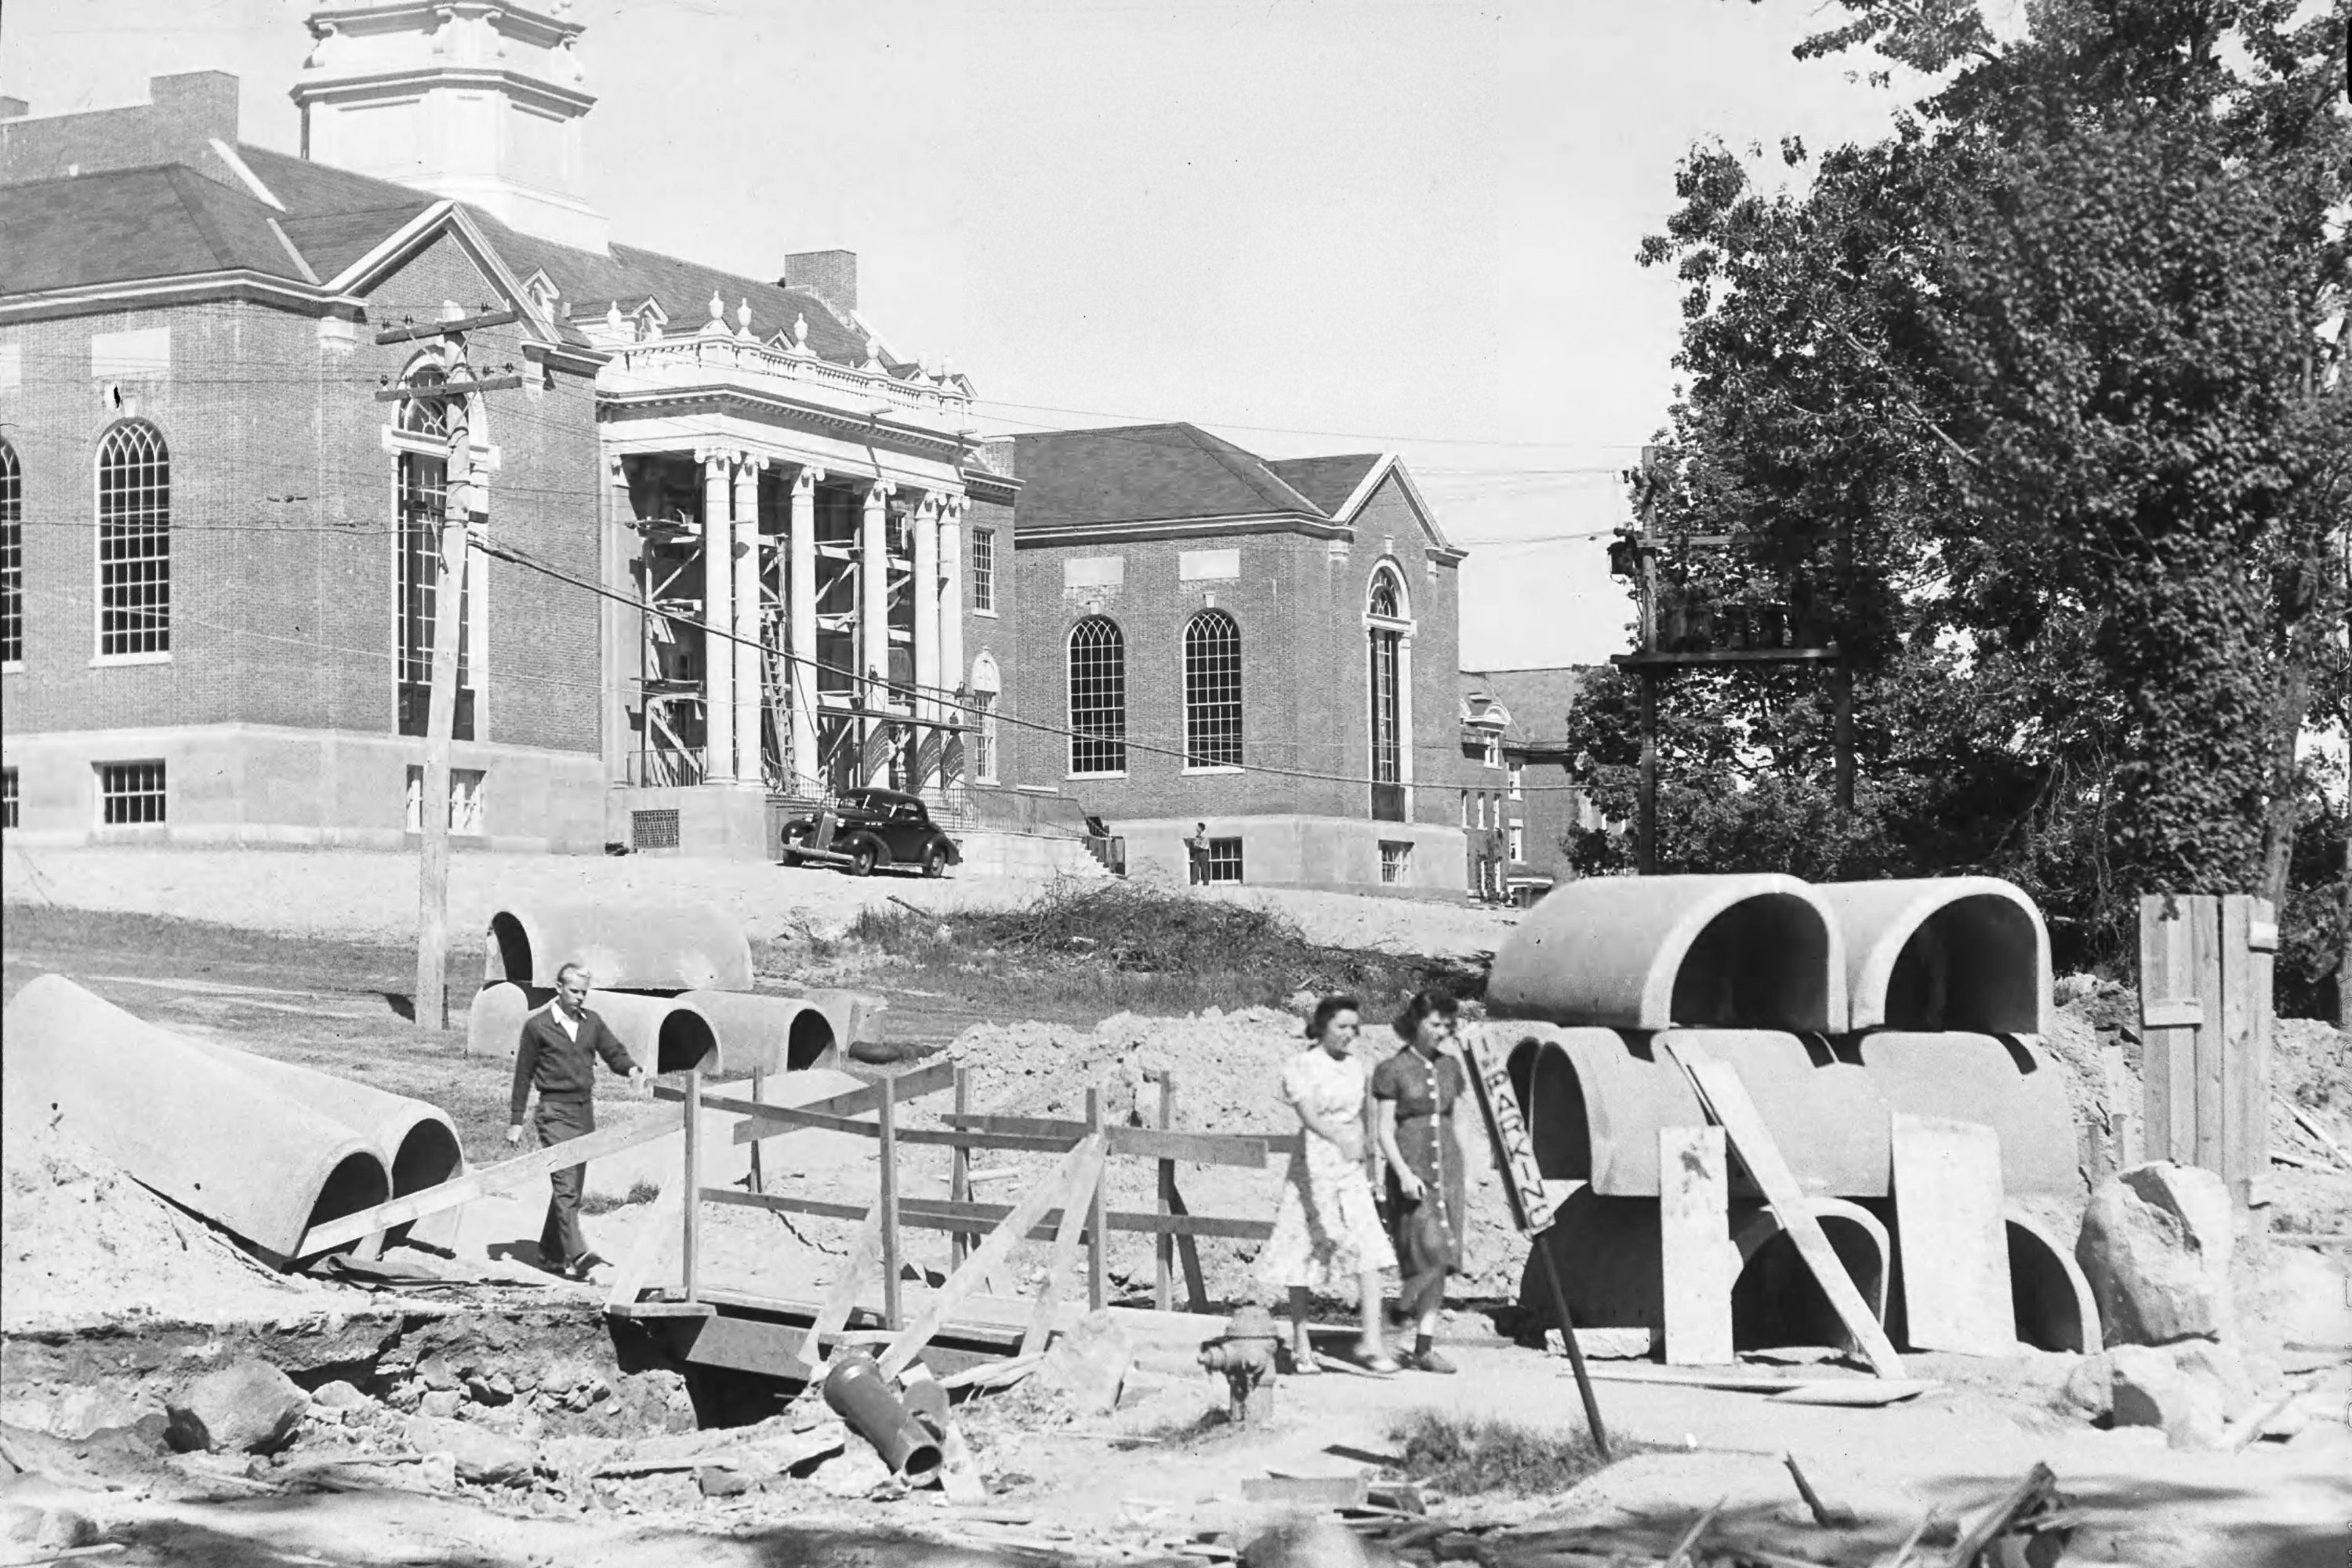 Steam lines are installed during the construction of Wilbur Cross Building in 1939. (Archives & Special Collections, UConn Library)